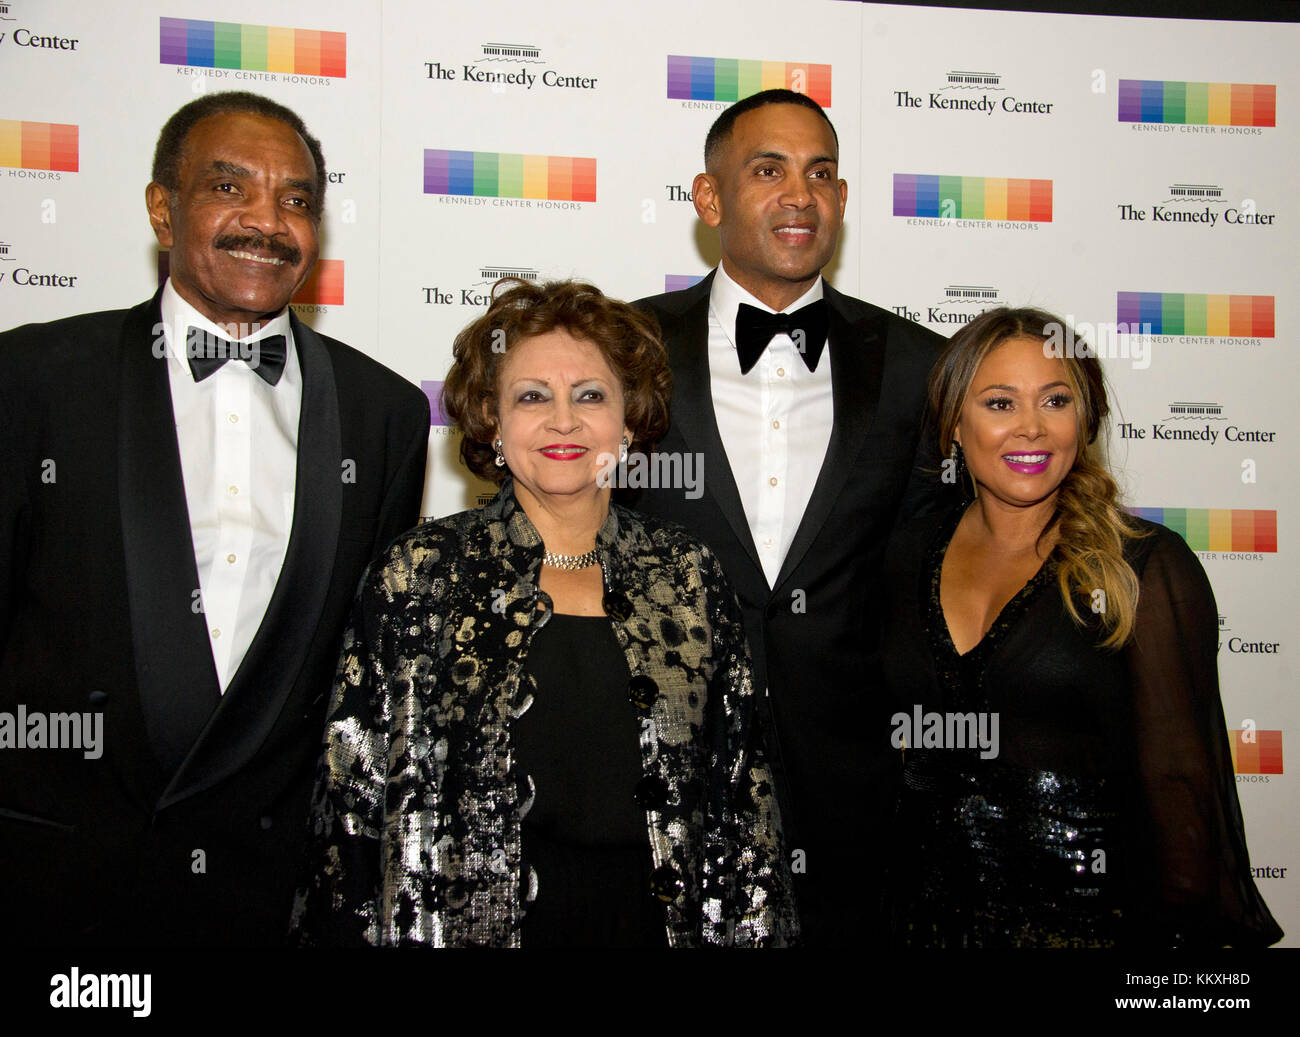 Washington DC, USA. 2nd December, 2017. From left to right: Calvin Hill, wife Janet, Grant Hill and wife Tamia, arrive for the formal Artist's Dinner honoring the recipients of the 40th Annual Kennedy Center Honors hosted by United States Secretary of State Rex Tillerson at the US Department of State in Washington, DC on Saturday, December 2, 2017. The 2017 honorees are: American dancer and choreographer Carmen de Lavallade; Cuban American singer-songwriter and actress Gloria Estefan; ; American television writer and producer Norman Lear; Credit: MediaPunch Inc/Alamy Live News Stock Photo